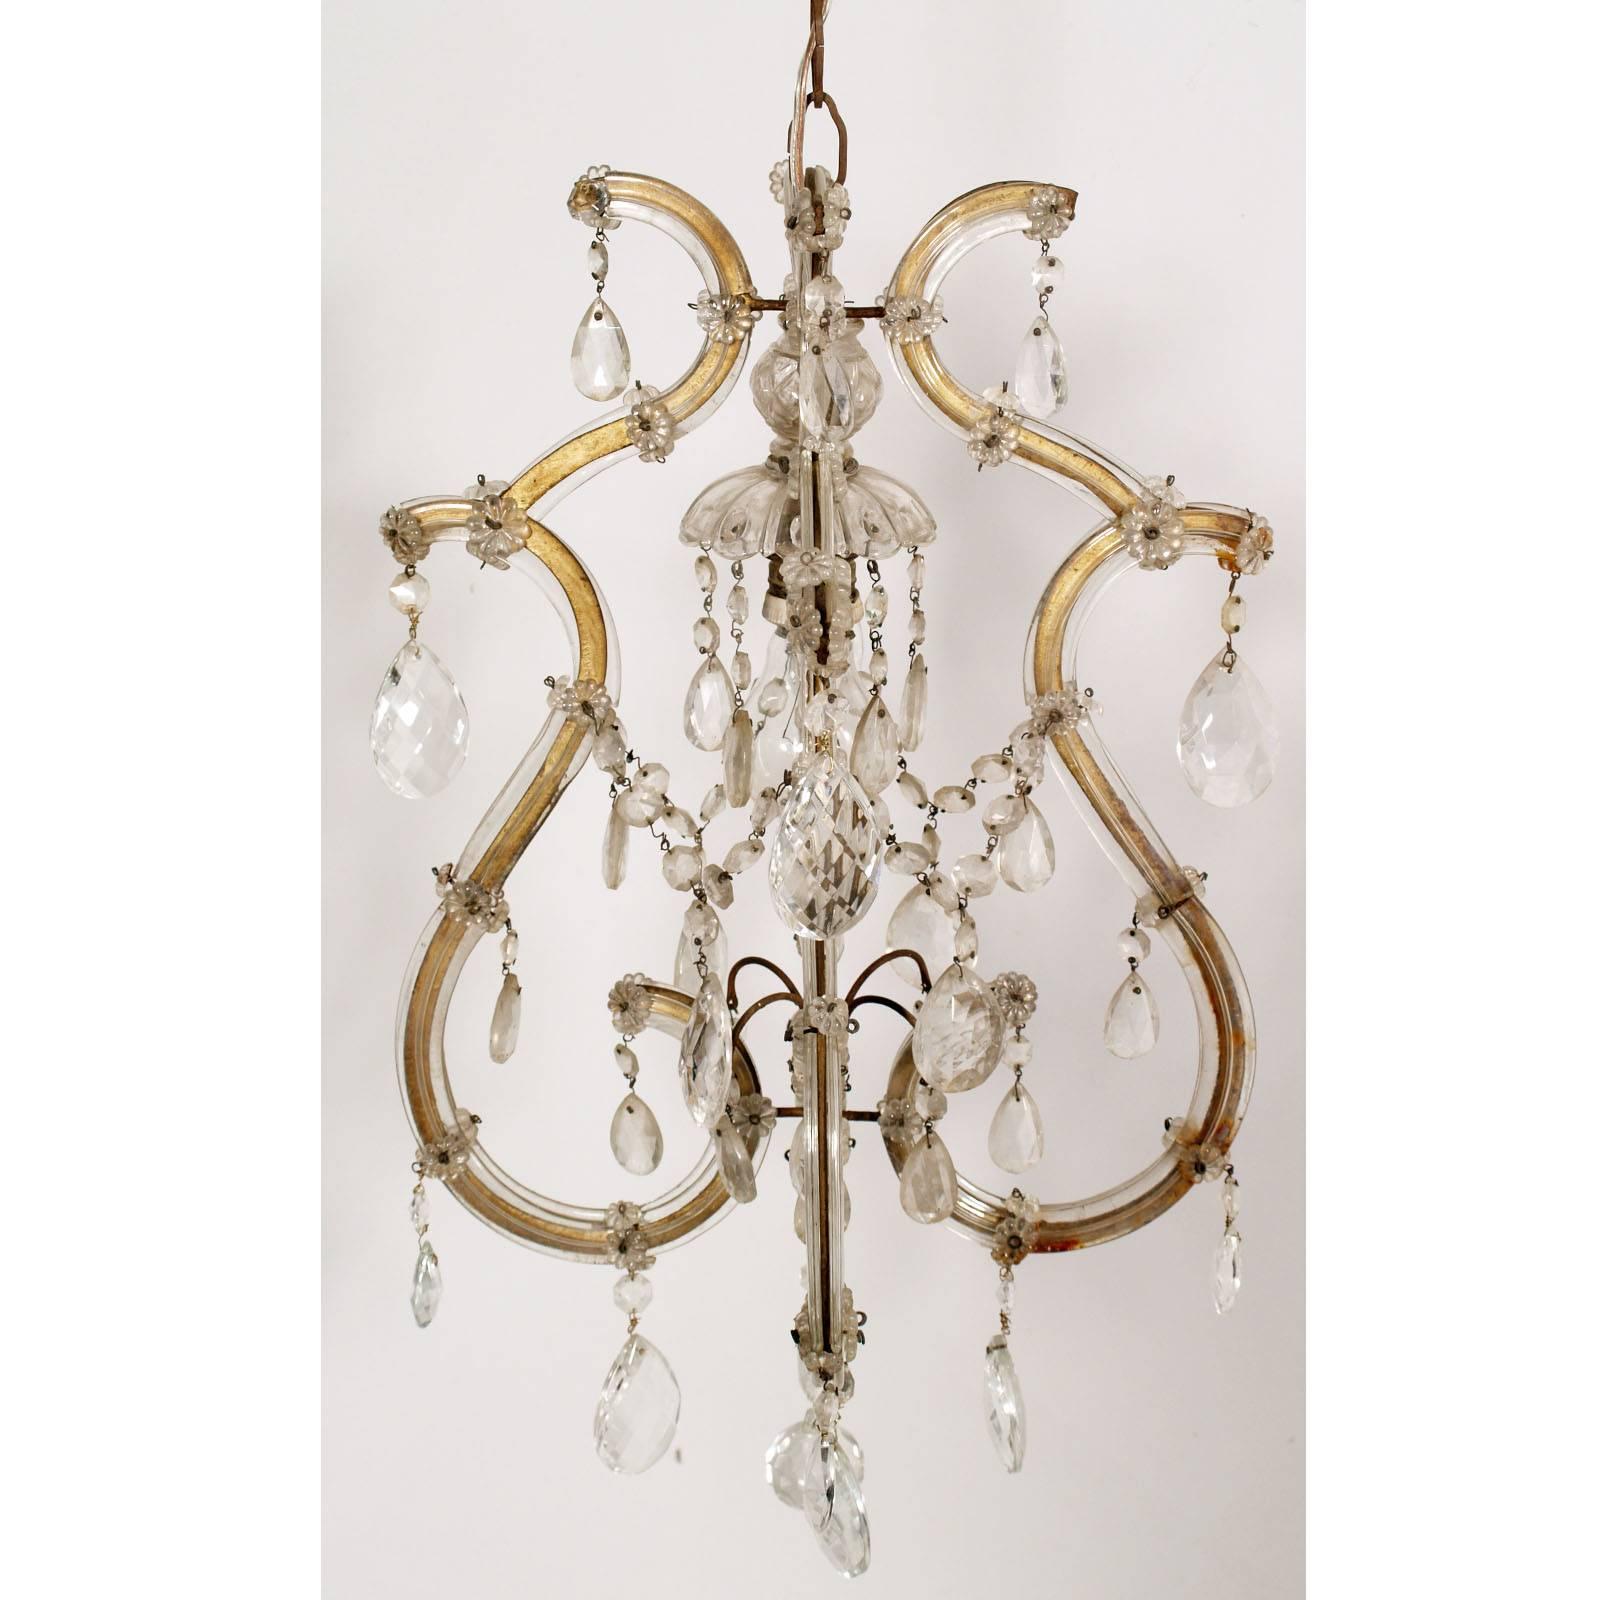 Early 20th century precious refined Maria Teresa original Murano chandelier by Salviati

In 1743, Venice, in honor of the Austrian Empress Maria Theresa (1717-1780), made a chandelier which became the prototype of an entire genre: it is a